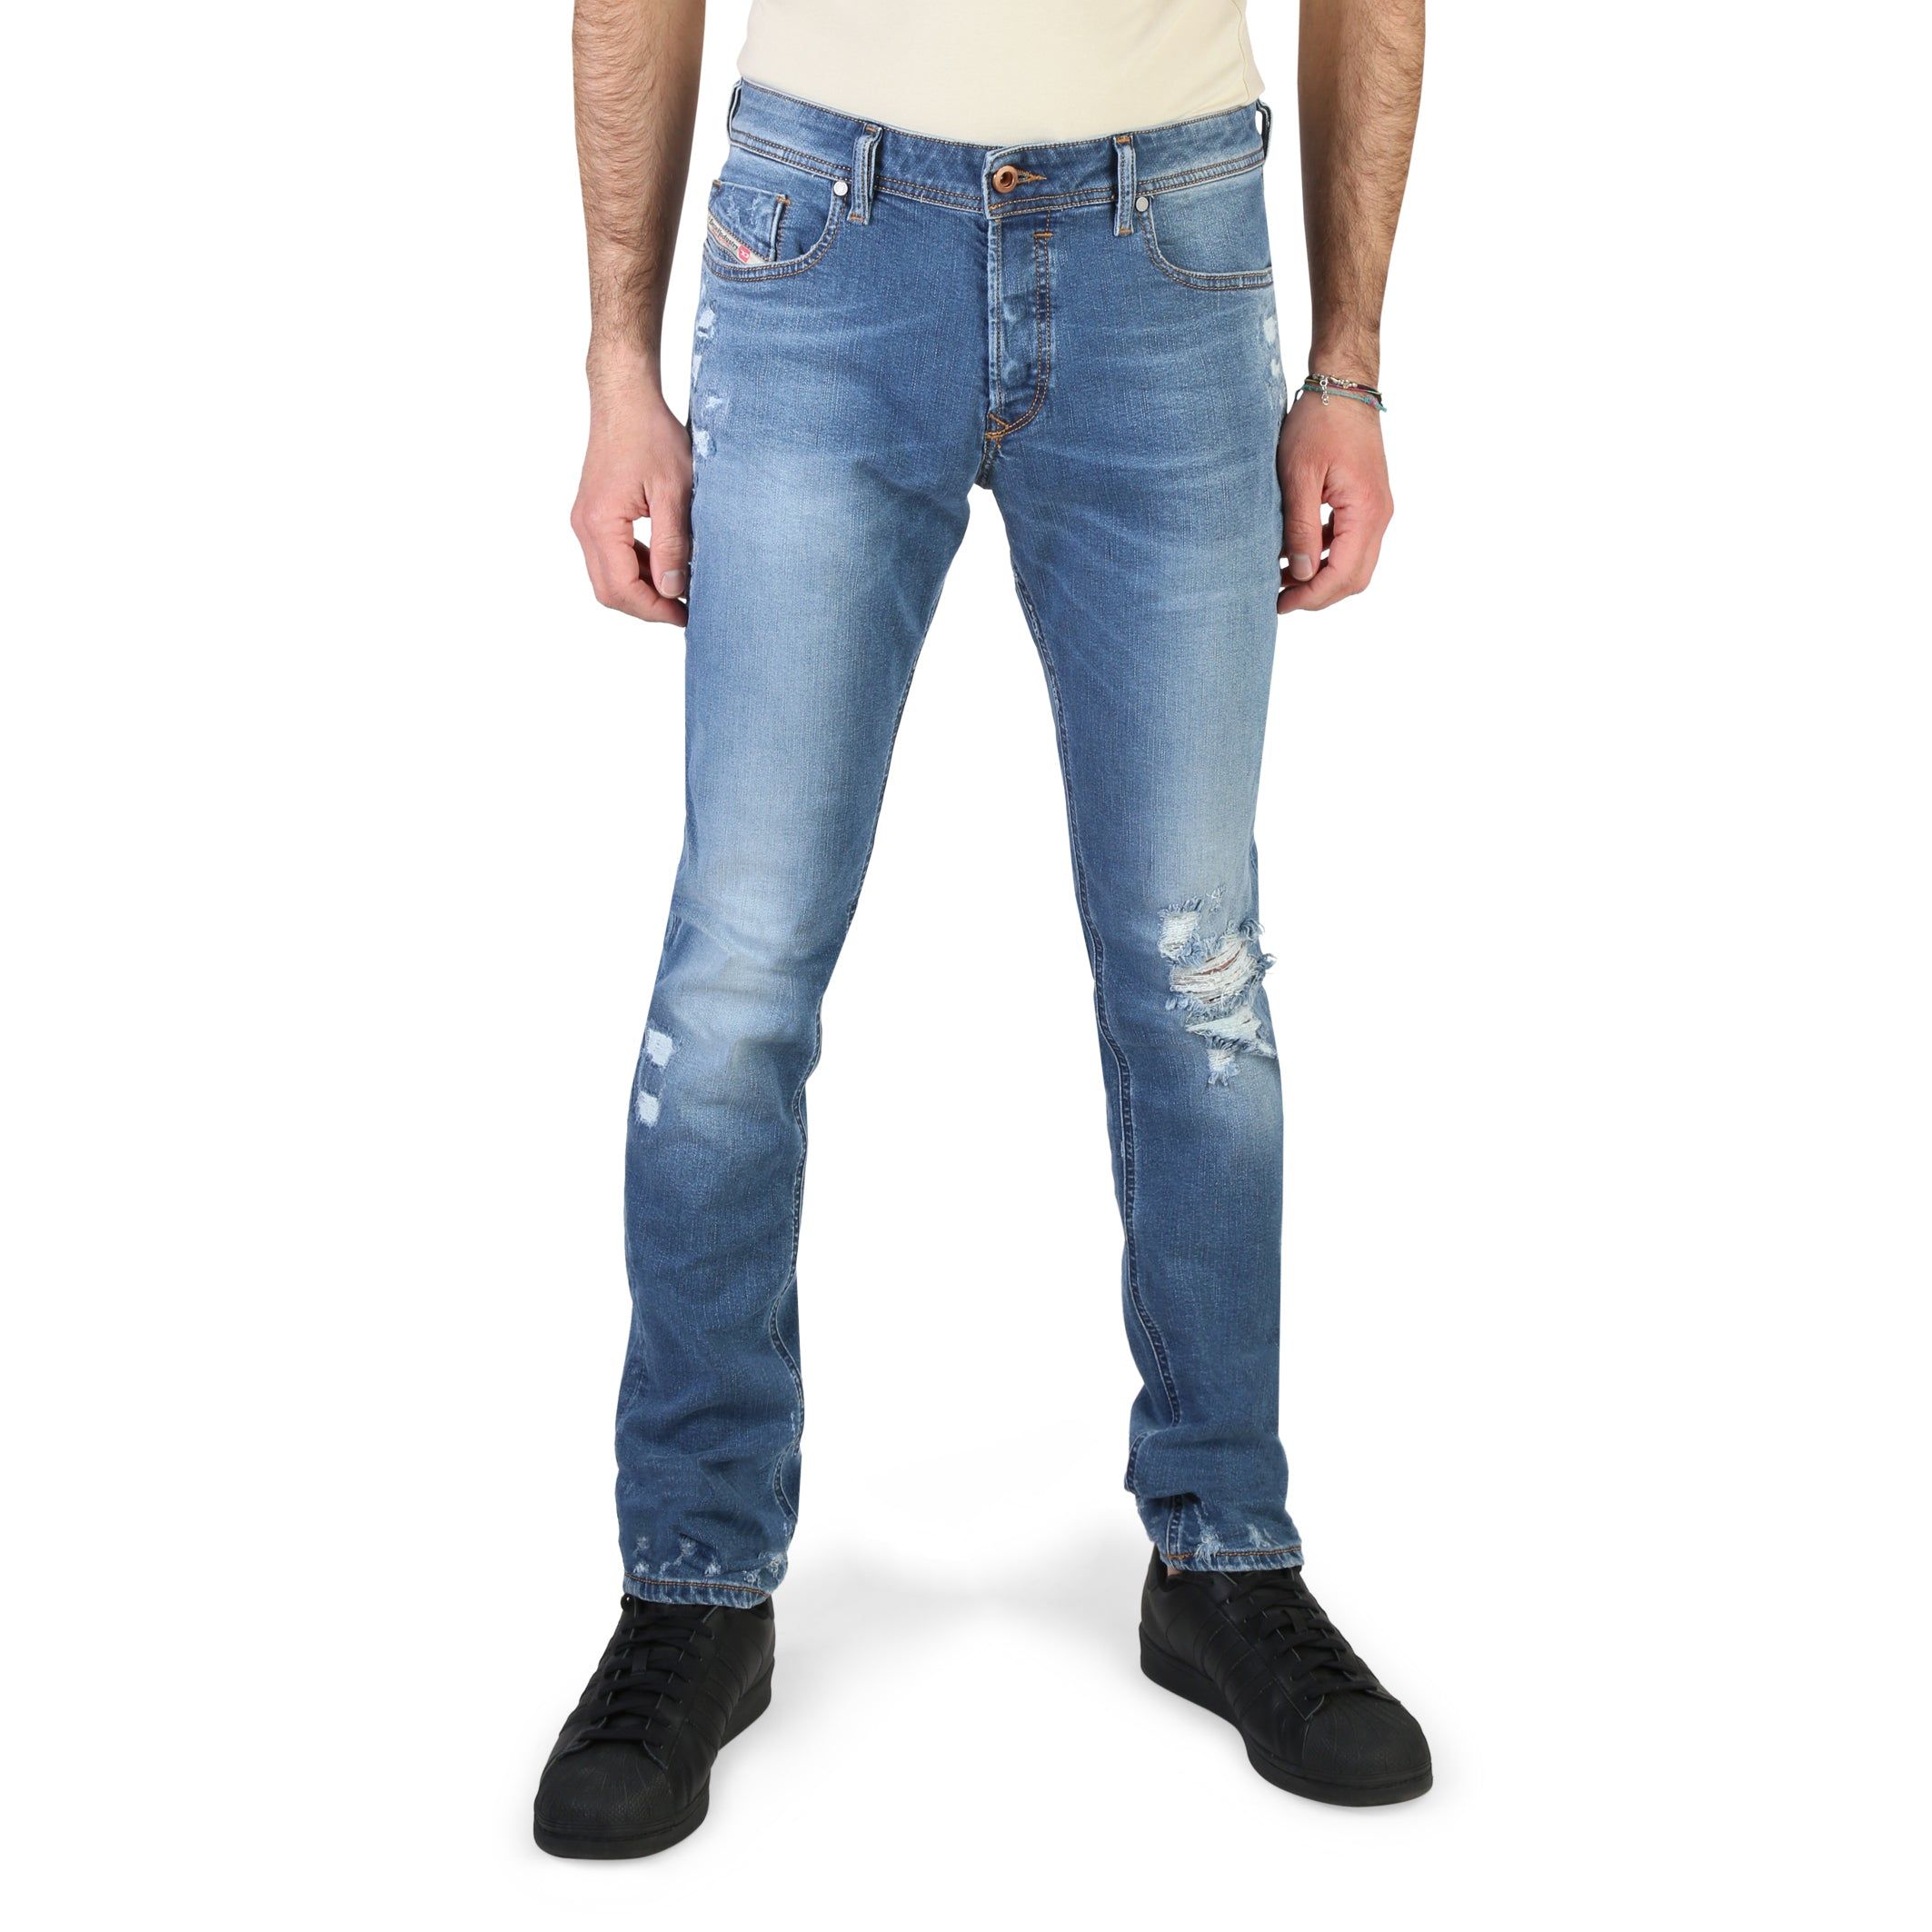 Gender: Man   Type: Jeans   Fastening: buttons, zip   External pockets: 5   Material: other fibres 59%, cotton 39%, elastane 2%   Washing: wash at 30° C   Model height, cm: 185   Model wears a size: 31   Fit: slim   Details: visible logo style:biker fit:slim Other Fibres 59%, Cotton 39%, Elastane 2% type:ripped-jeans occasion:street wash:light-wash